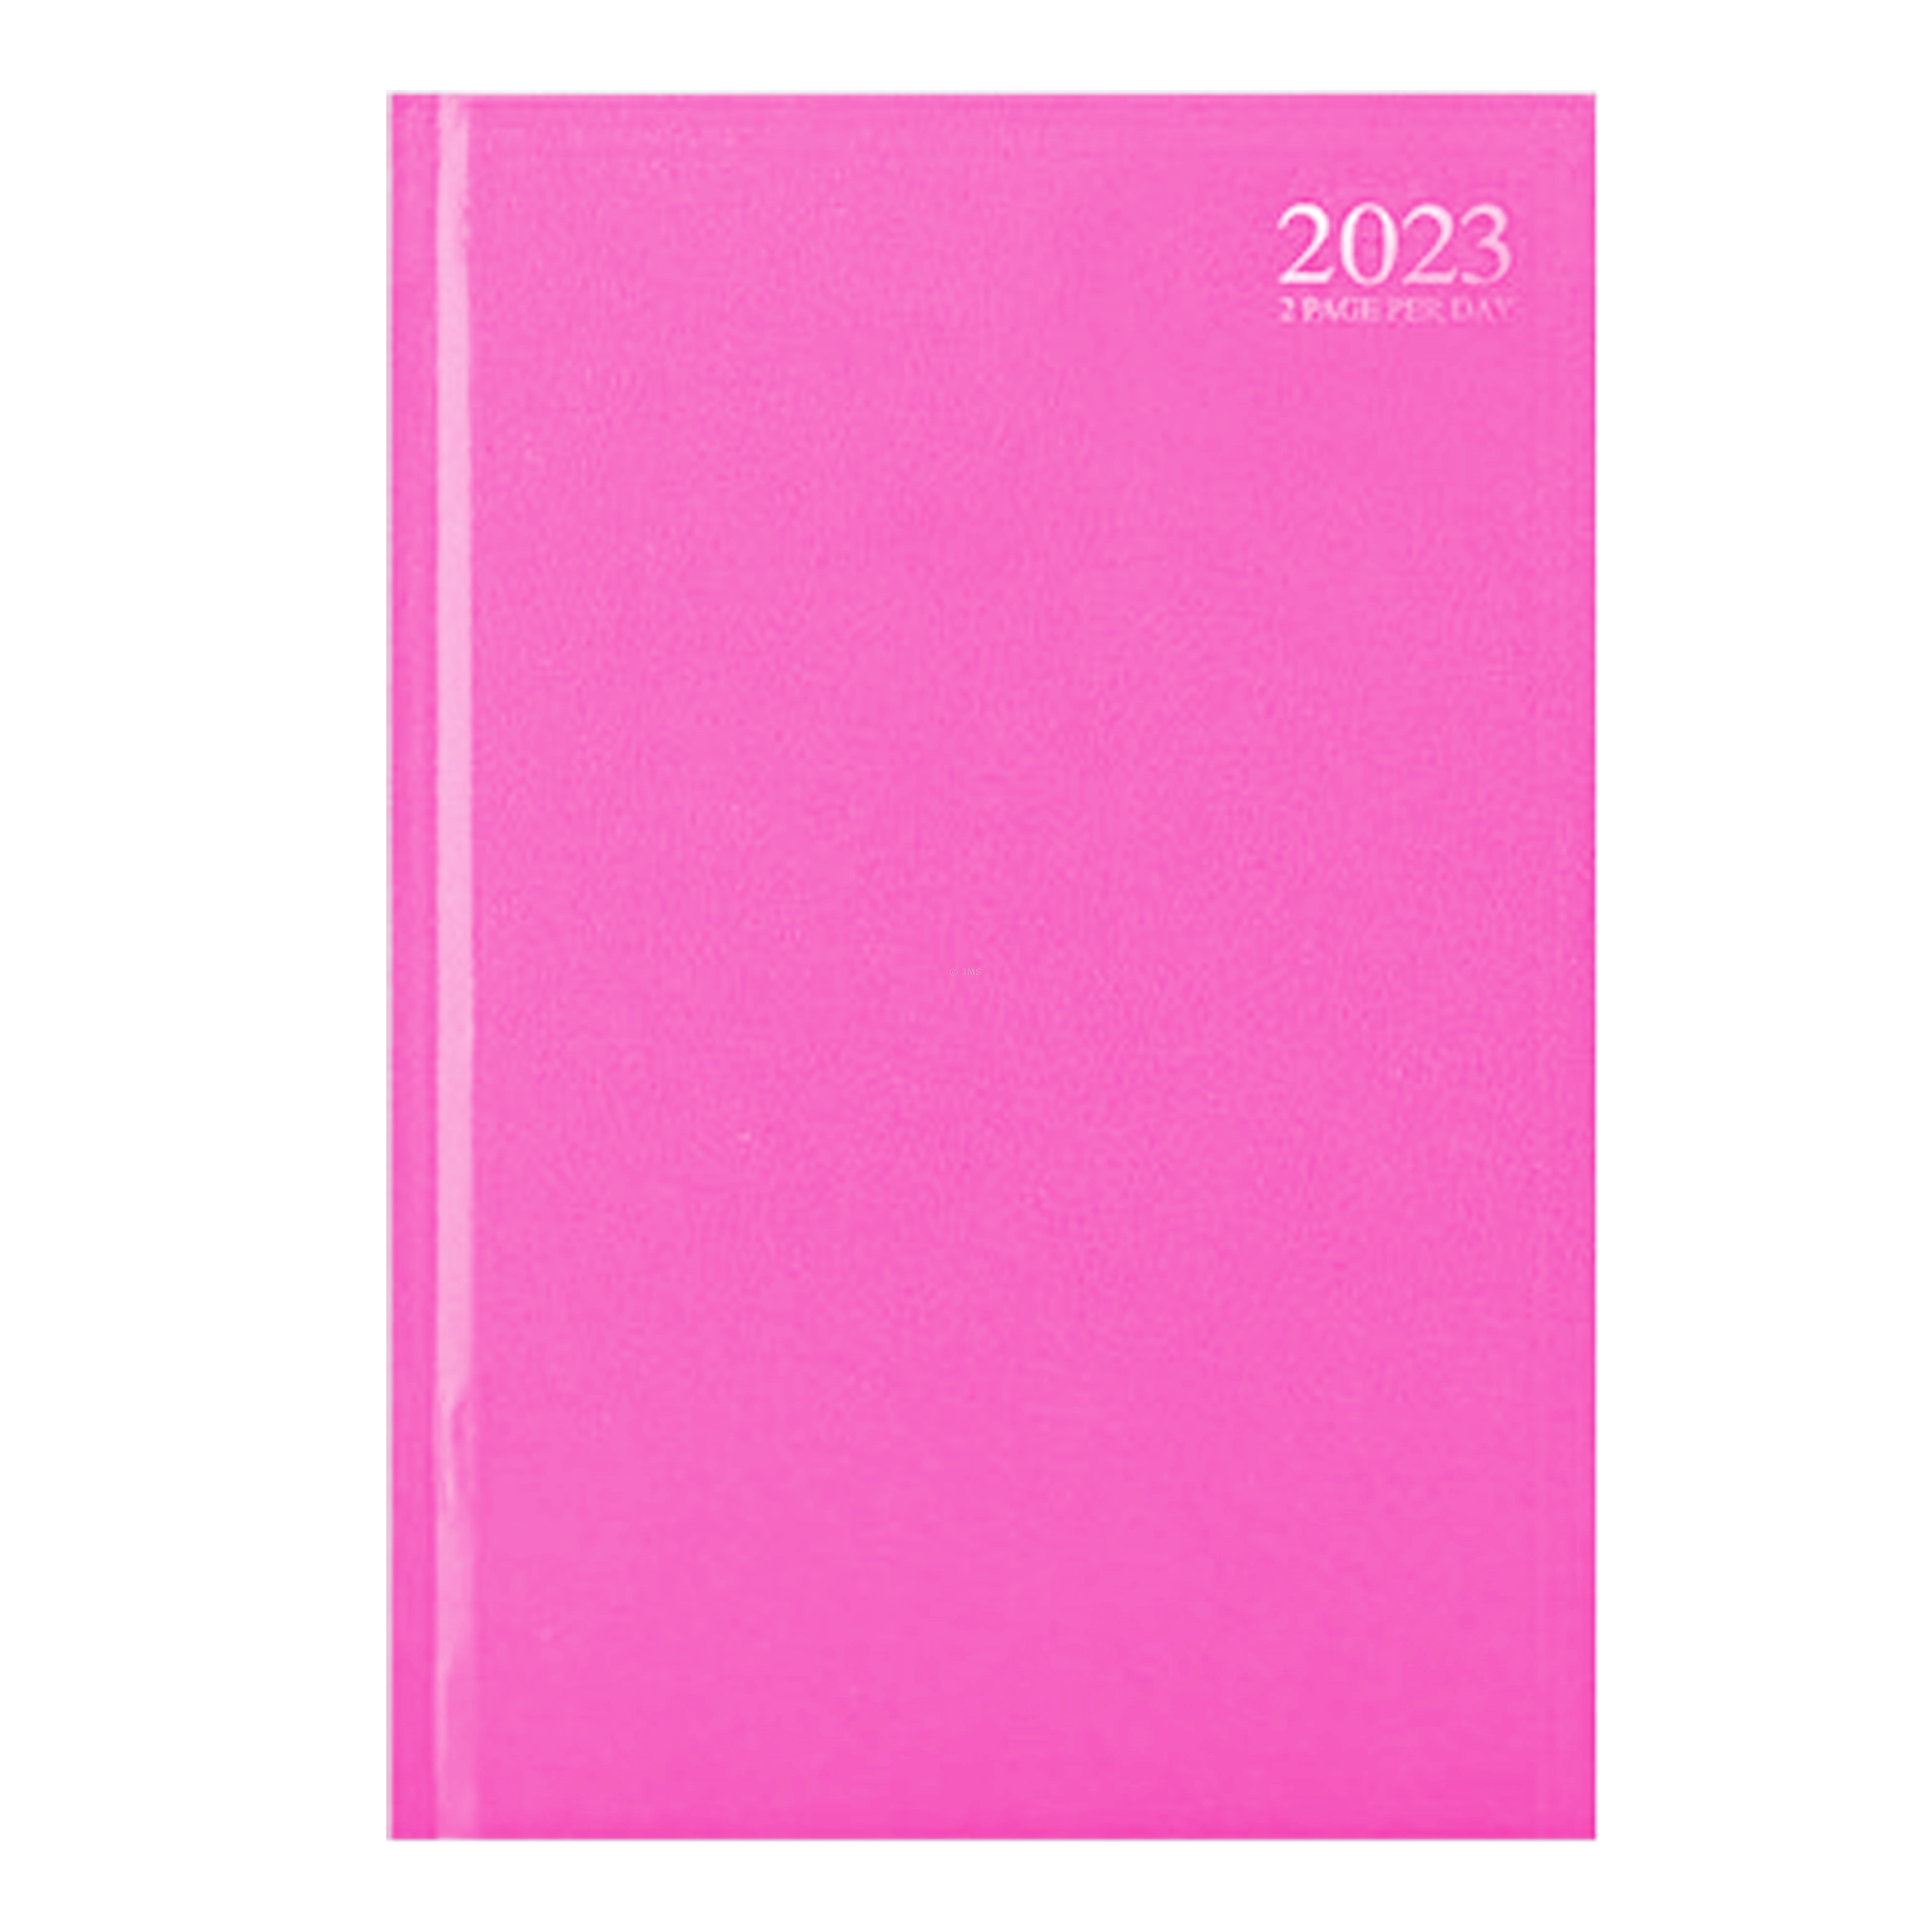 2023 A4 PINK Day A Page (2 Pages) Appointment Office Desk Diary Hardback Cover